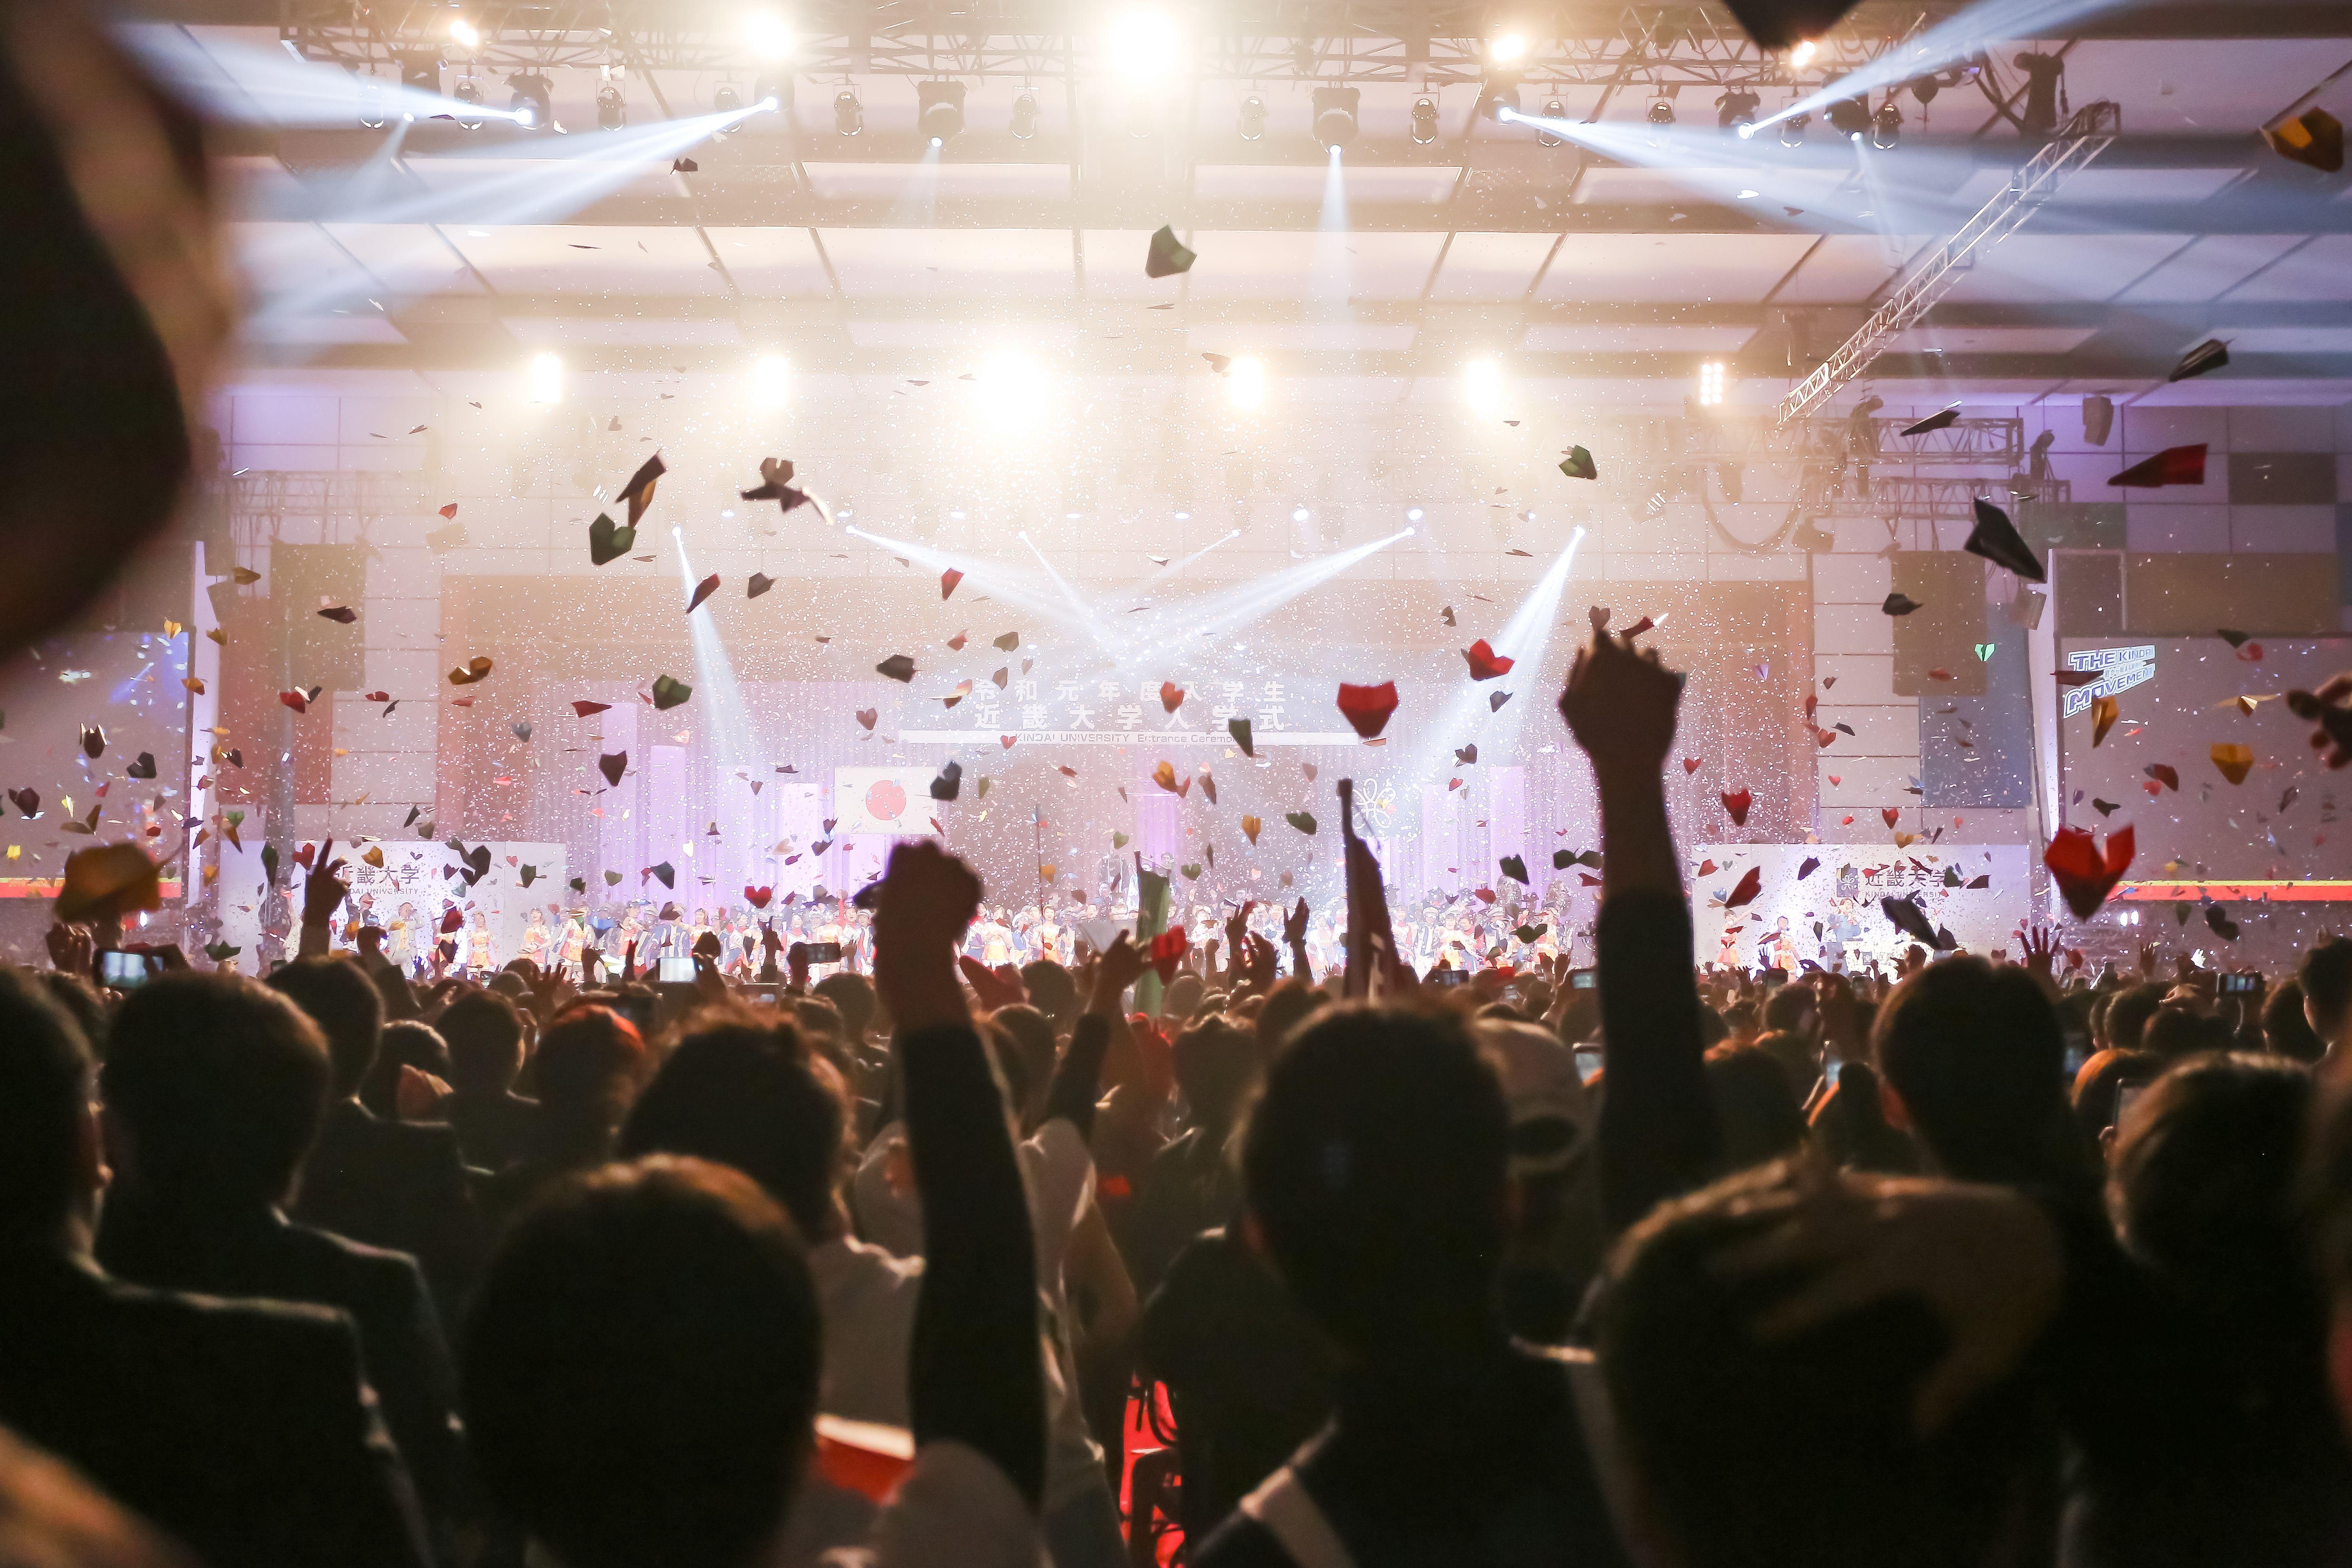 Kindai University's legendary opening ceremony blows away new students with confetti and idols (Source: SoraNews24 -Japan News-)